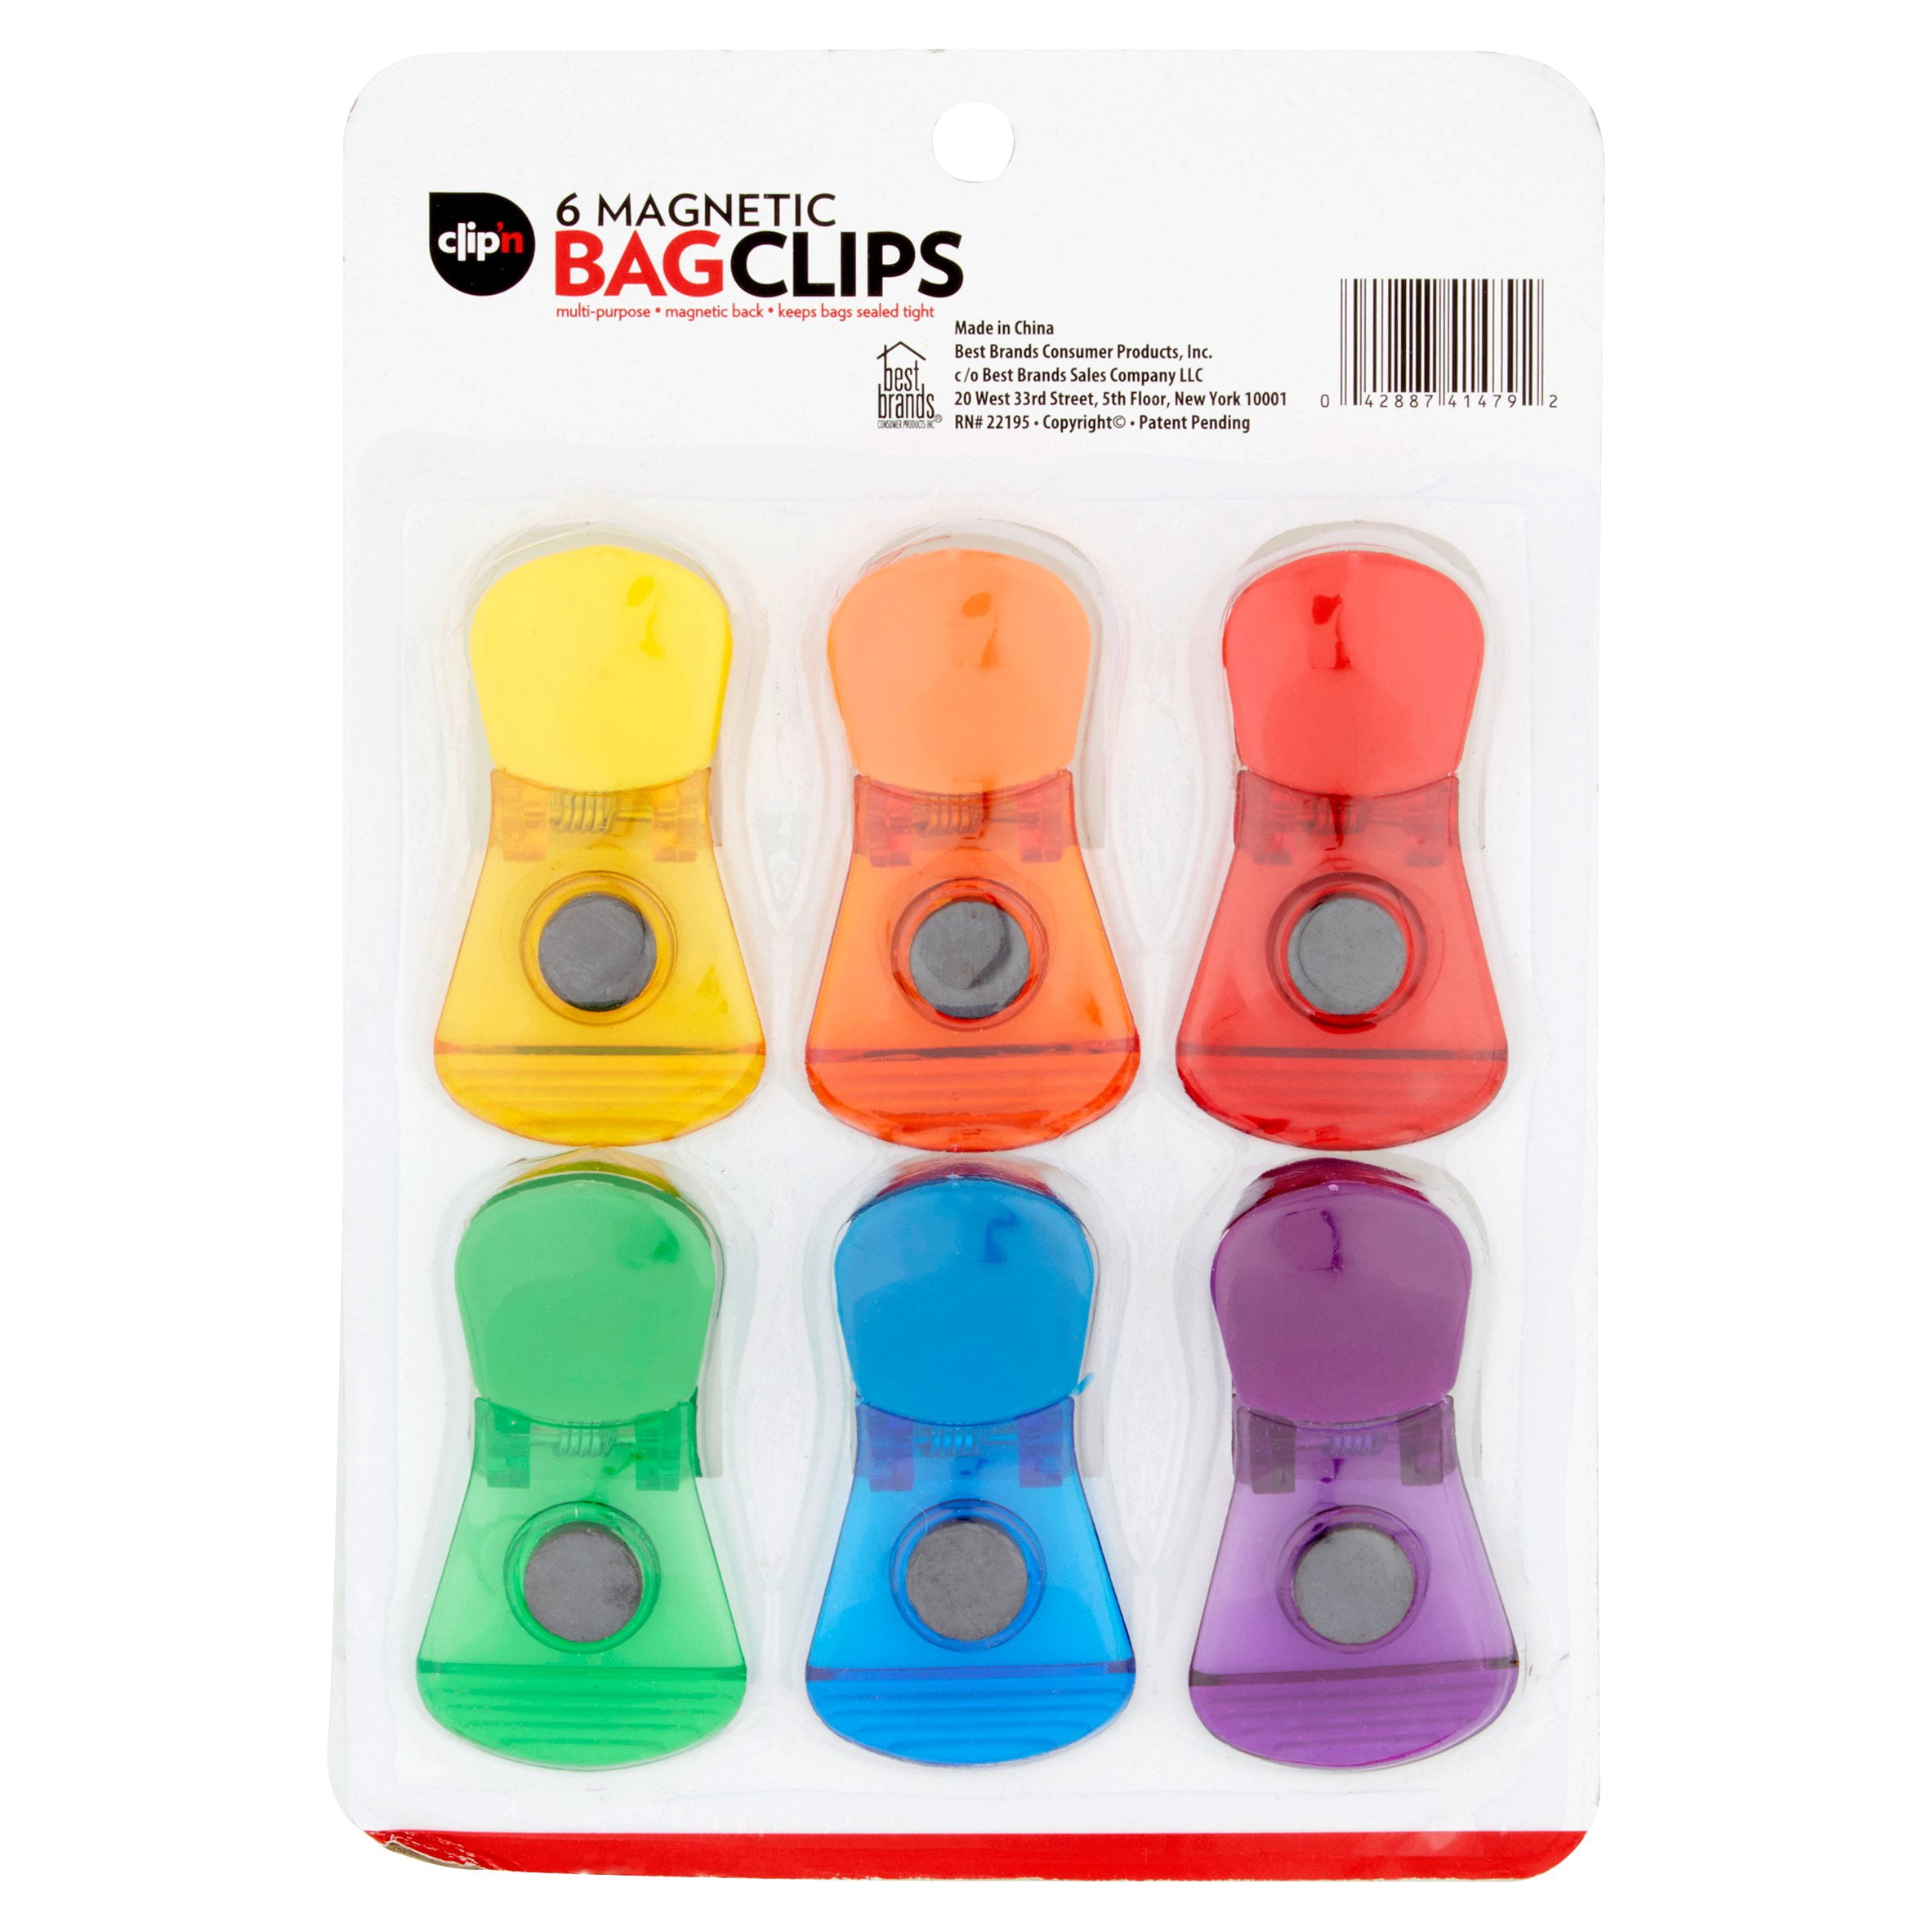 Amazon.com : Chip Clips, 6 Pack Bag Clips, Chip Clips Bag Clips Food Clips,  Stainless Steel Bag Clips for Food, Office Kitchen Home Usage Storage :  Office Products